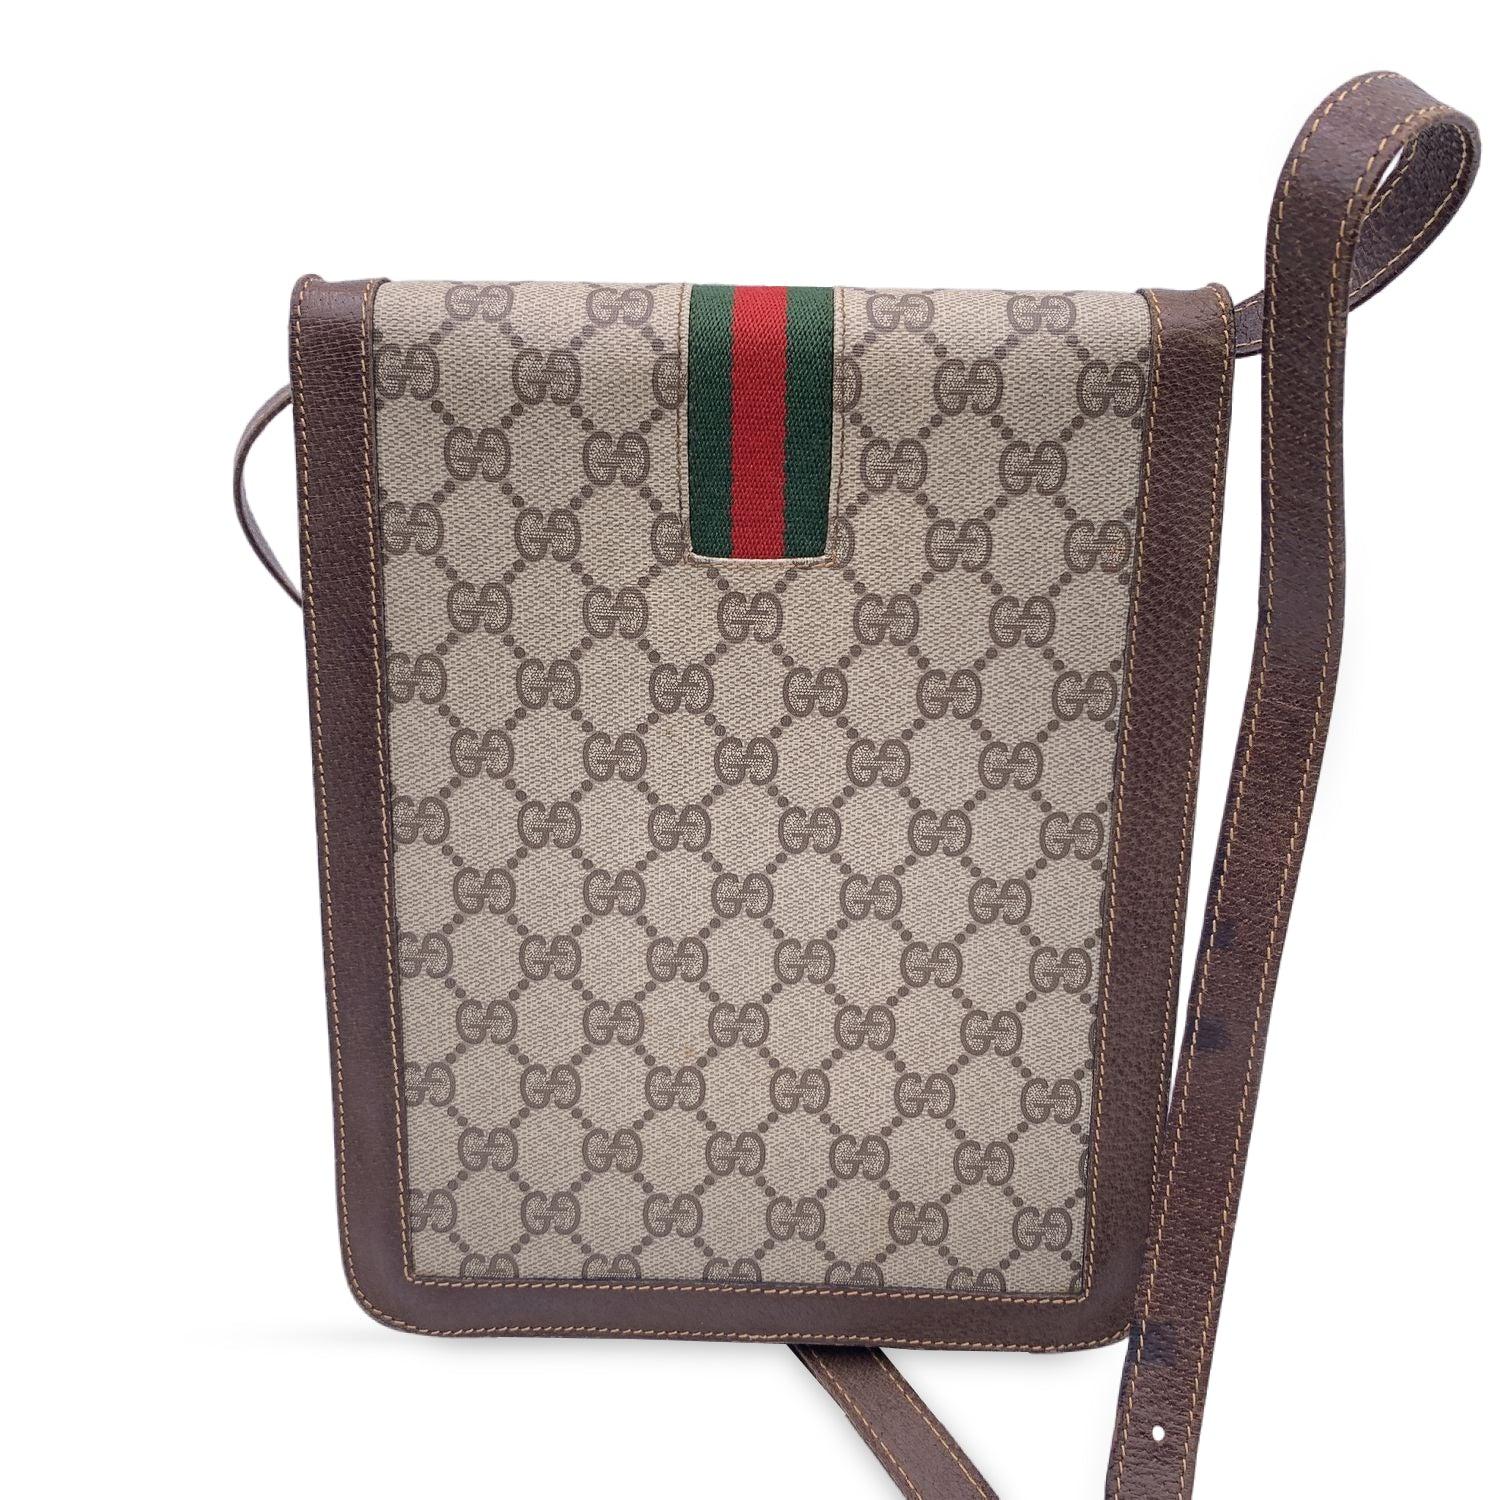 Gucci Vintage Monogram Canvas Vertical Shoulder Bag with Stripes In Good Condition For Sale In Rome, Rome